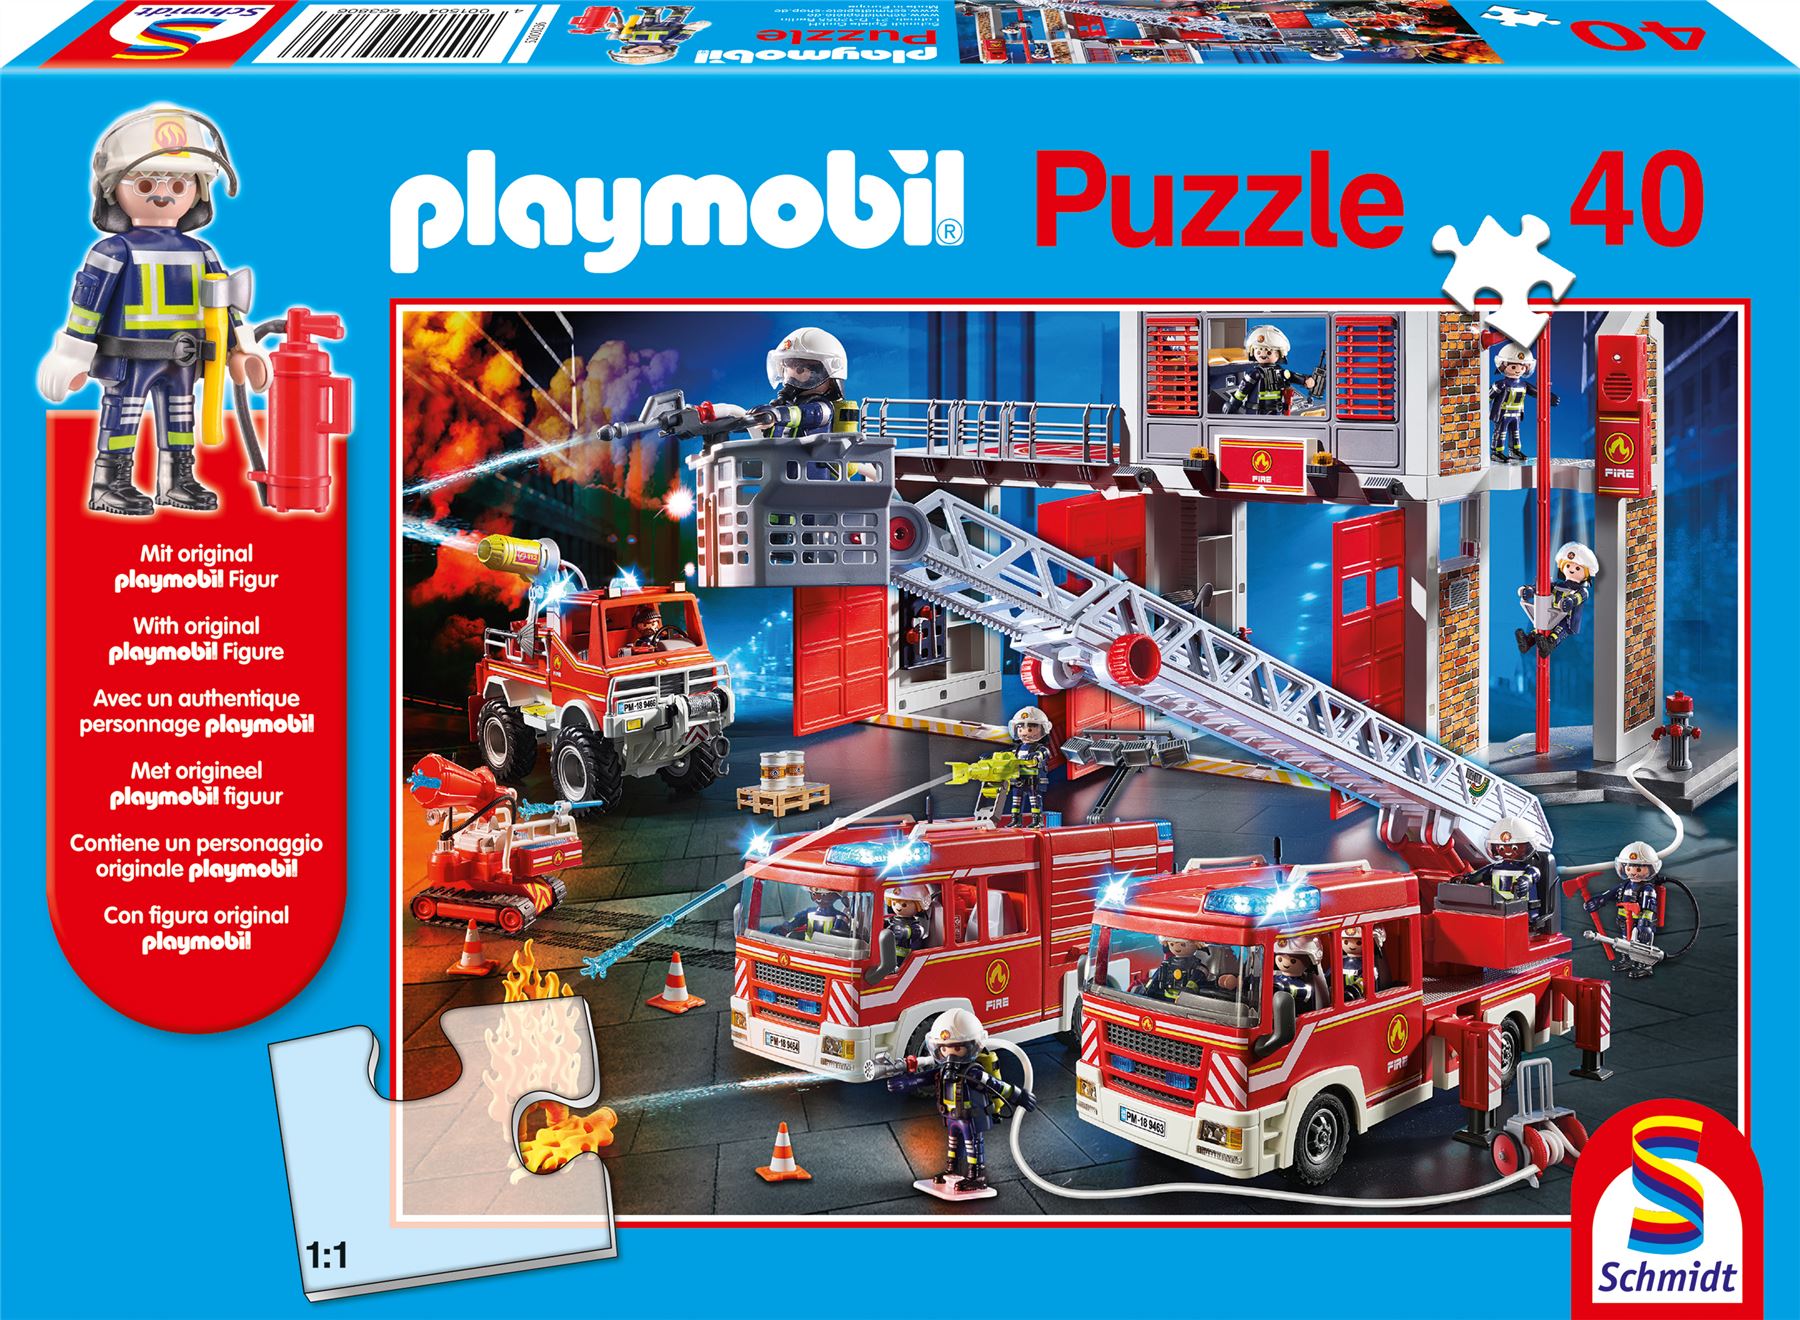 Playmobil: A Zoo Adventure Puzzle and Play